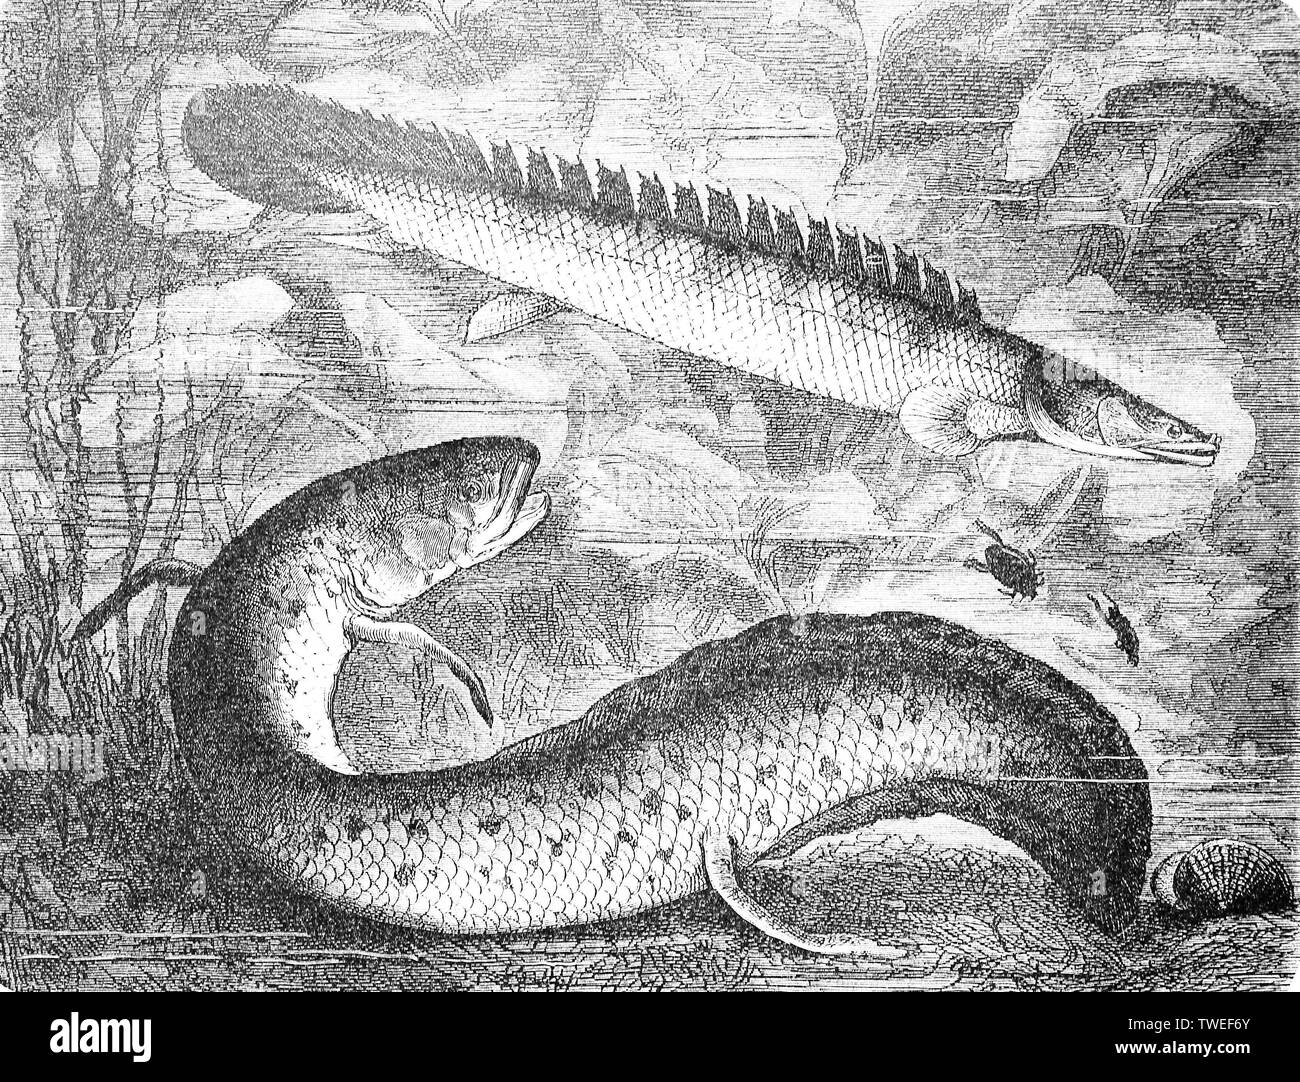 Nile bichir and West African lungfish, (Polypterus bichirnischer), (Protopterus annectens), 1881, historical woodcut illustration, Germany Stock Photo